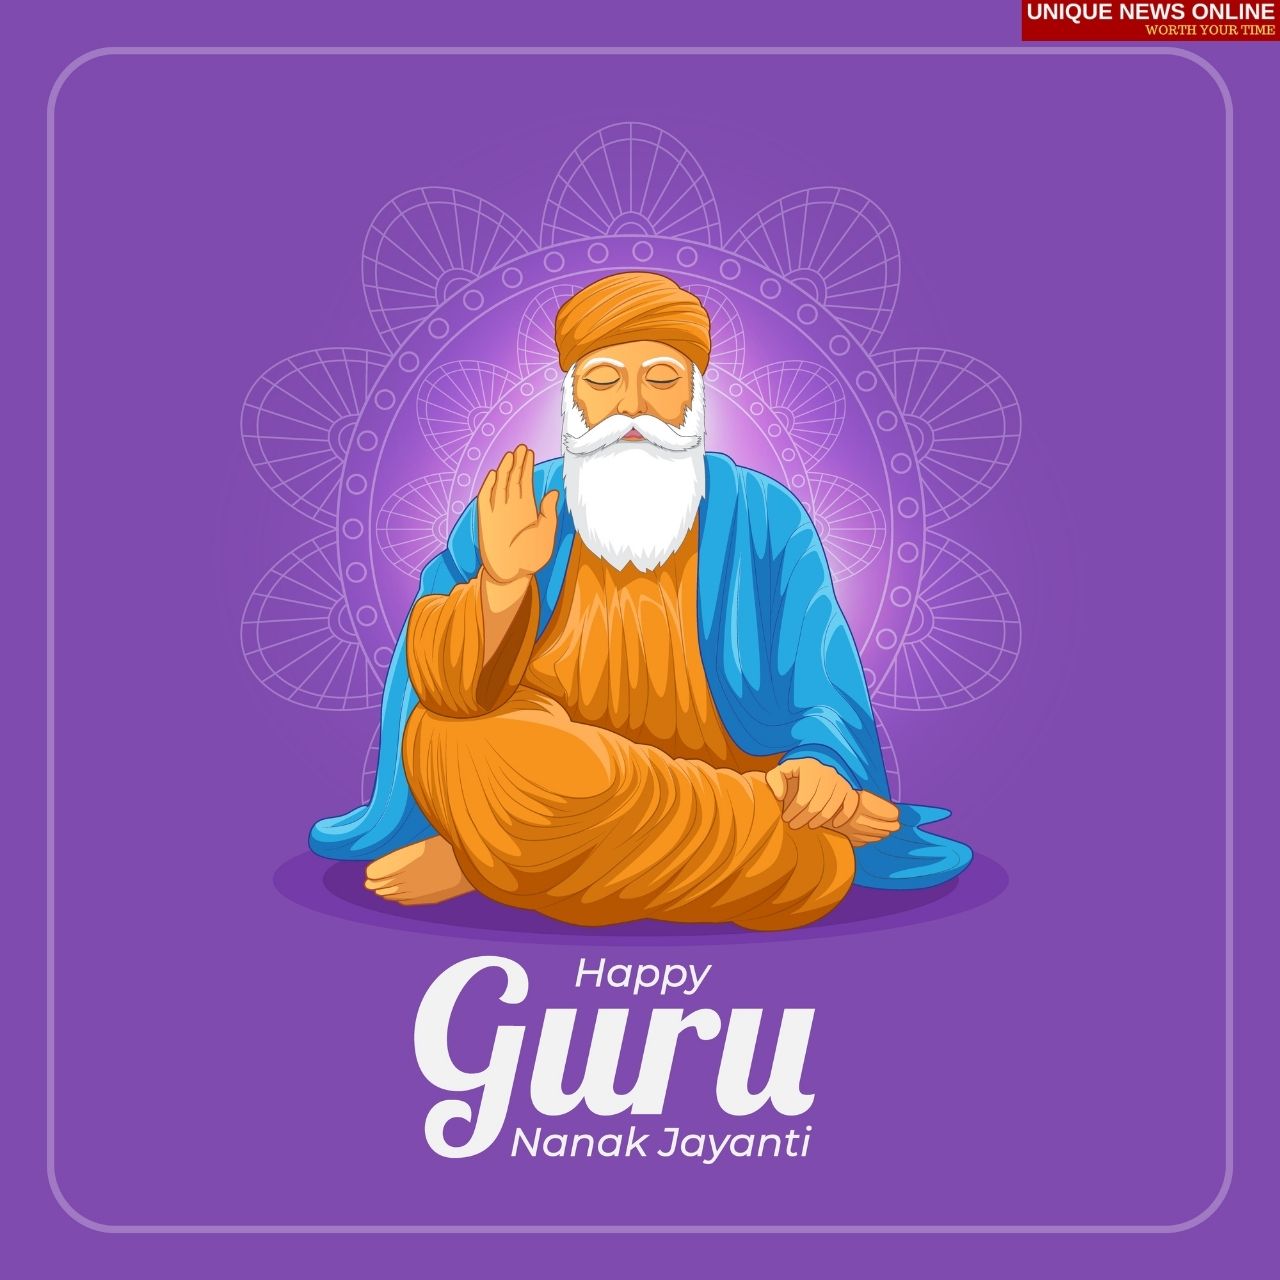 Guru Nanak Jayanti 2021 Quotes, Wishes, HD Images, Greetings, Messages, and Slogans to greet your loved ones